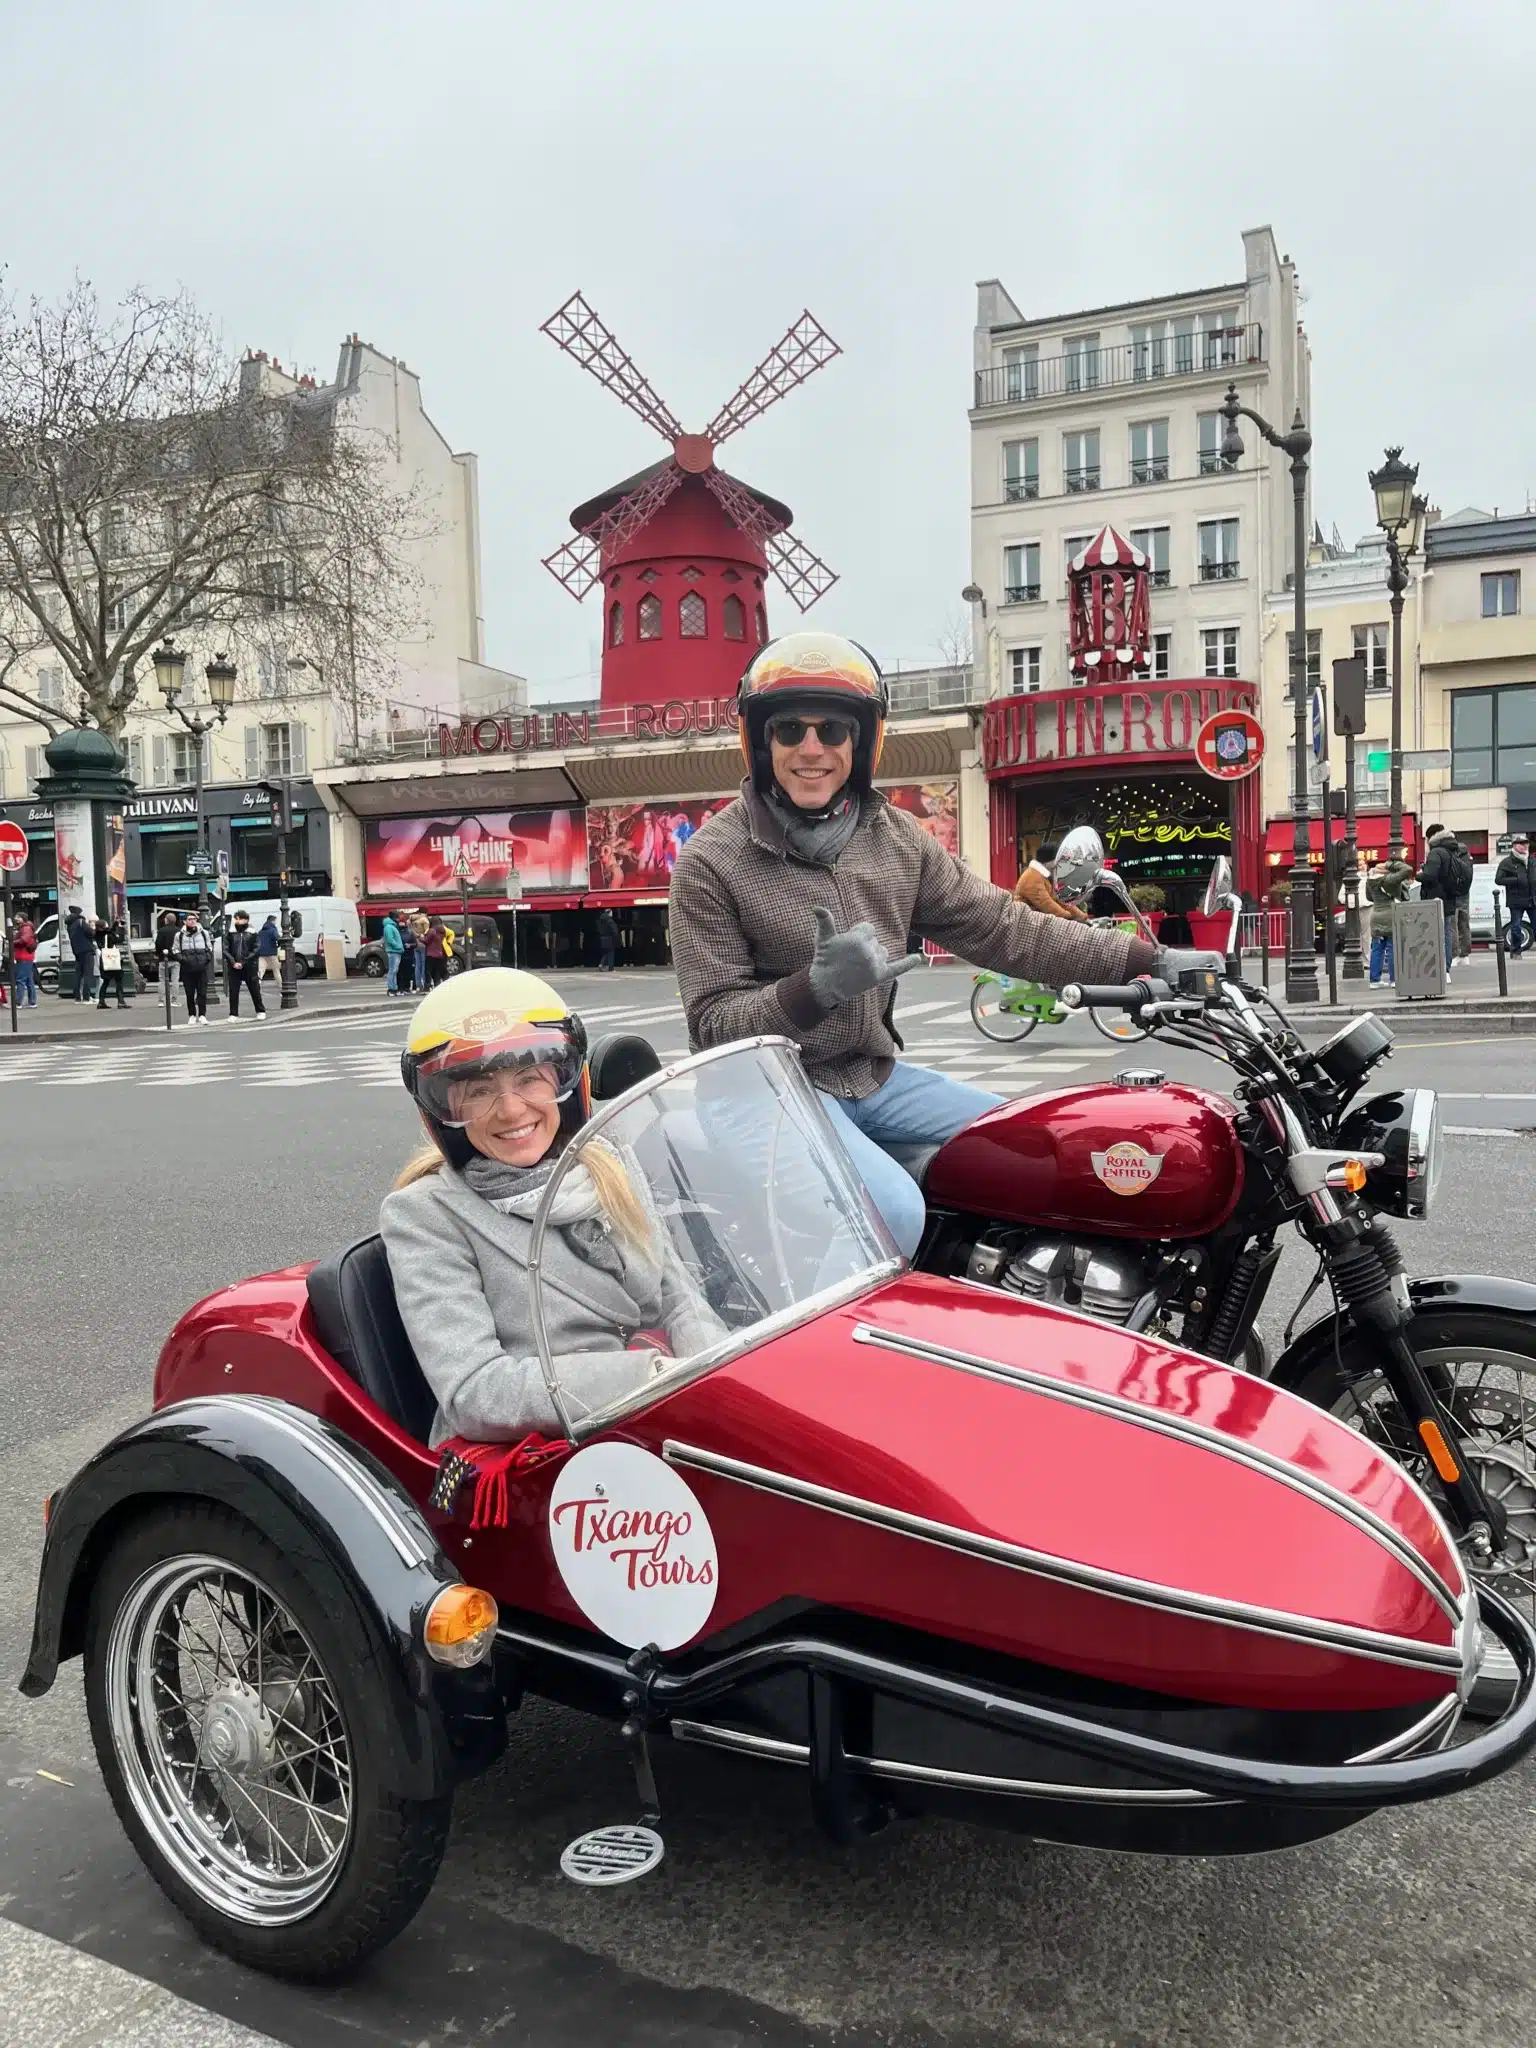 Sidecar Tour of Montmartre